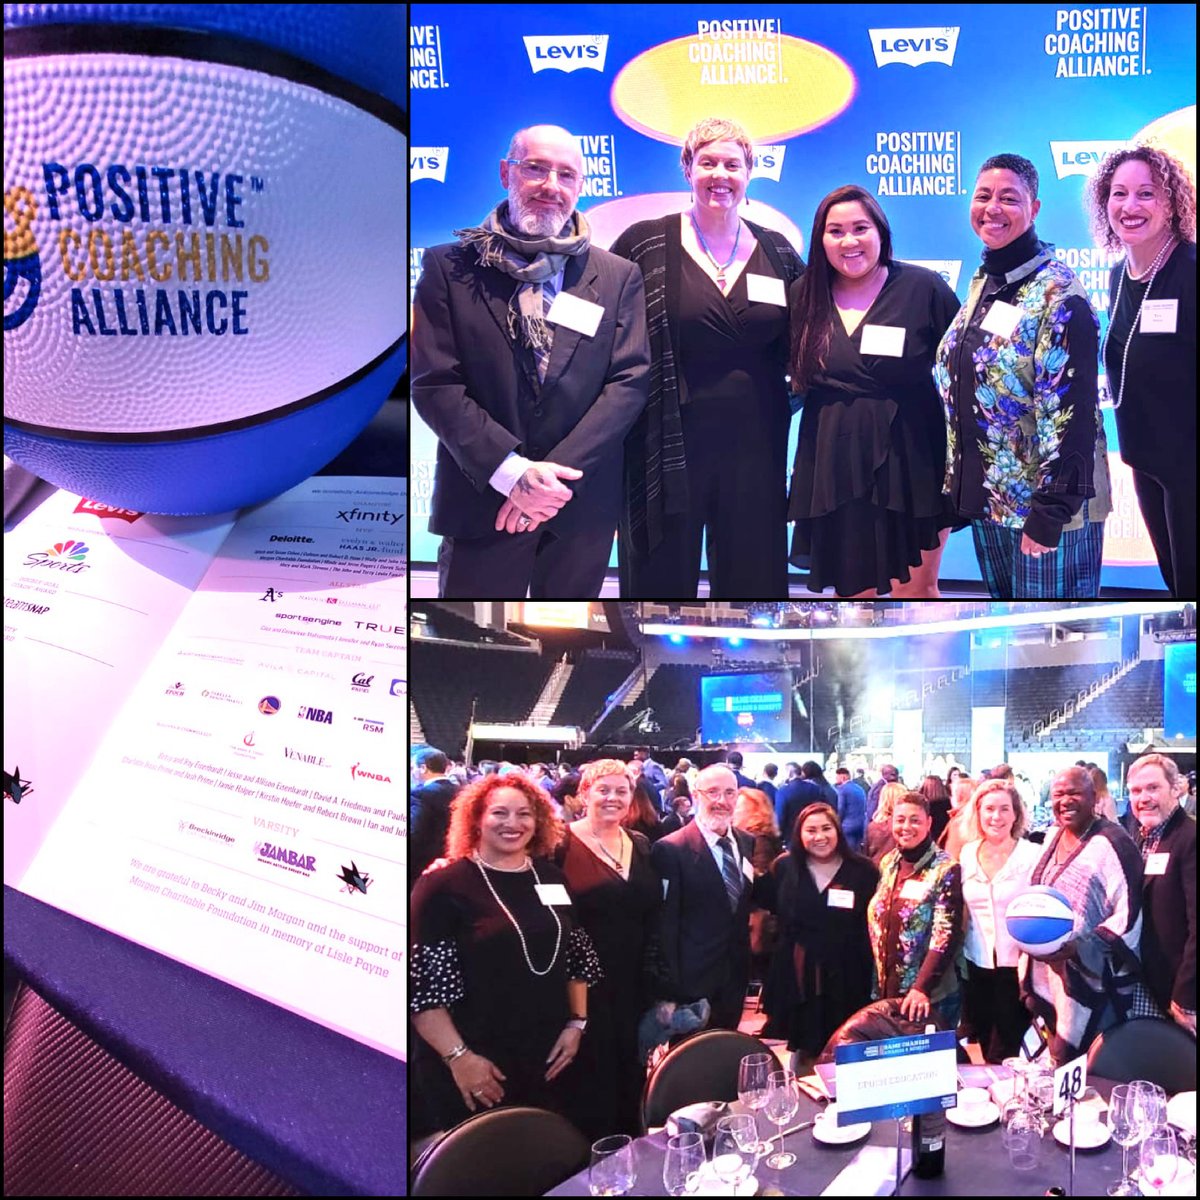 Epoch Education was a proud sponsor of the Positive Coaching Alliance Gala. Dr. Nancy Dome serves on their National Leadership Council. Our team stands with many others to make youth sports more positive, equitable, and accessible to all kids.

#youthsports #positivecoaching